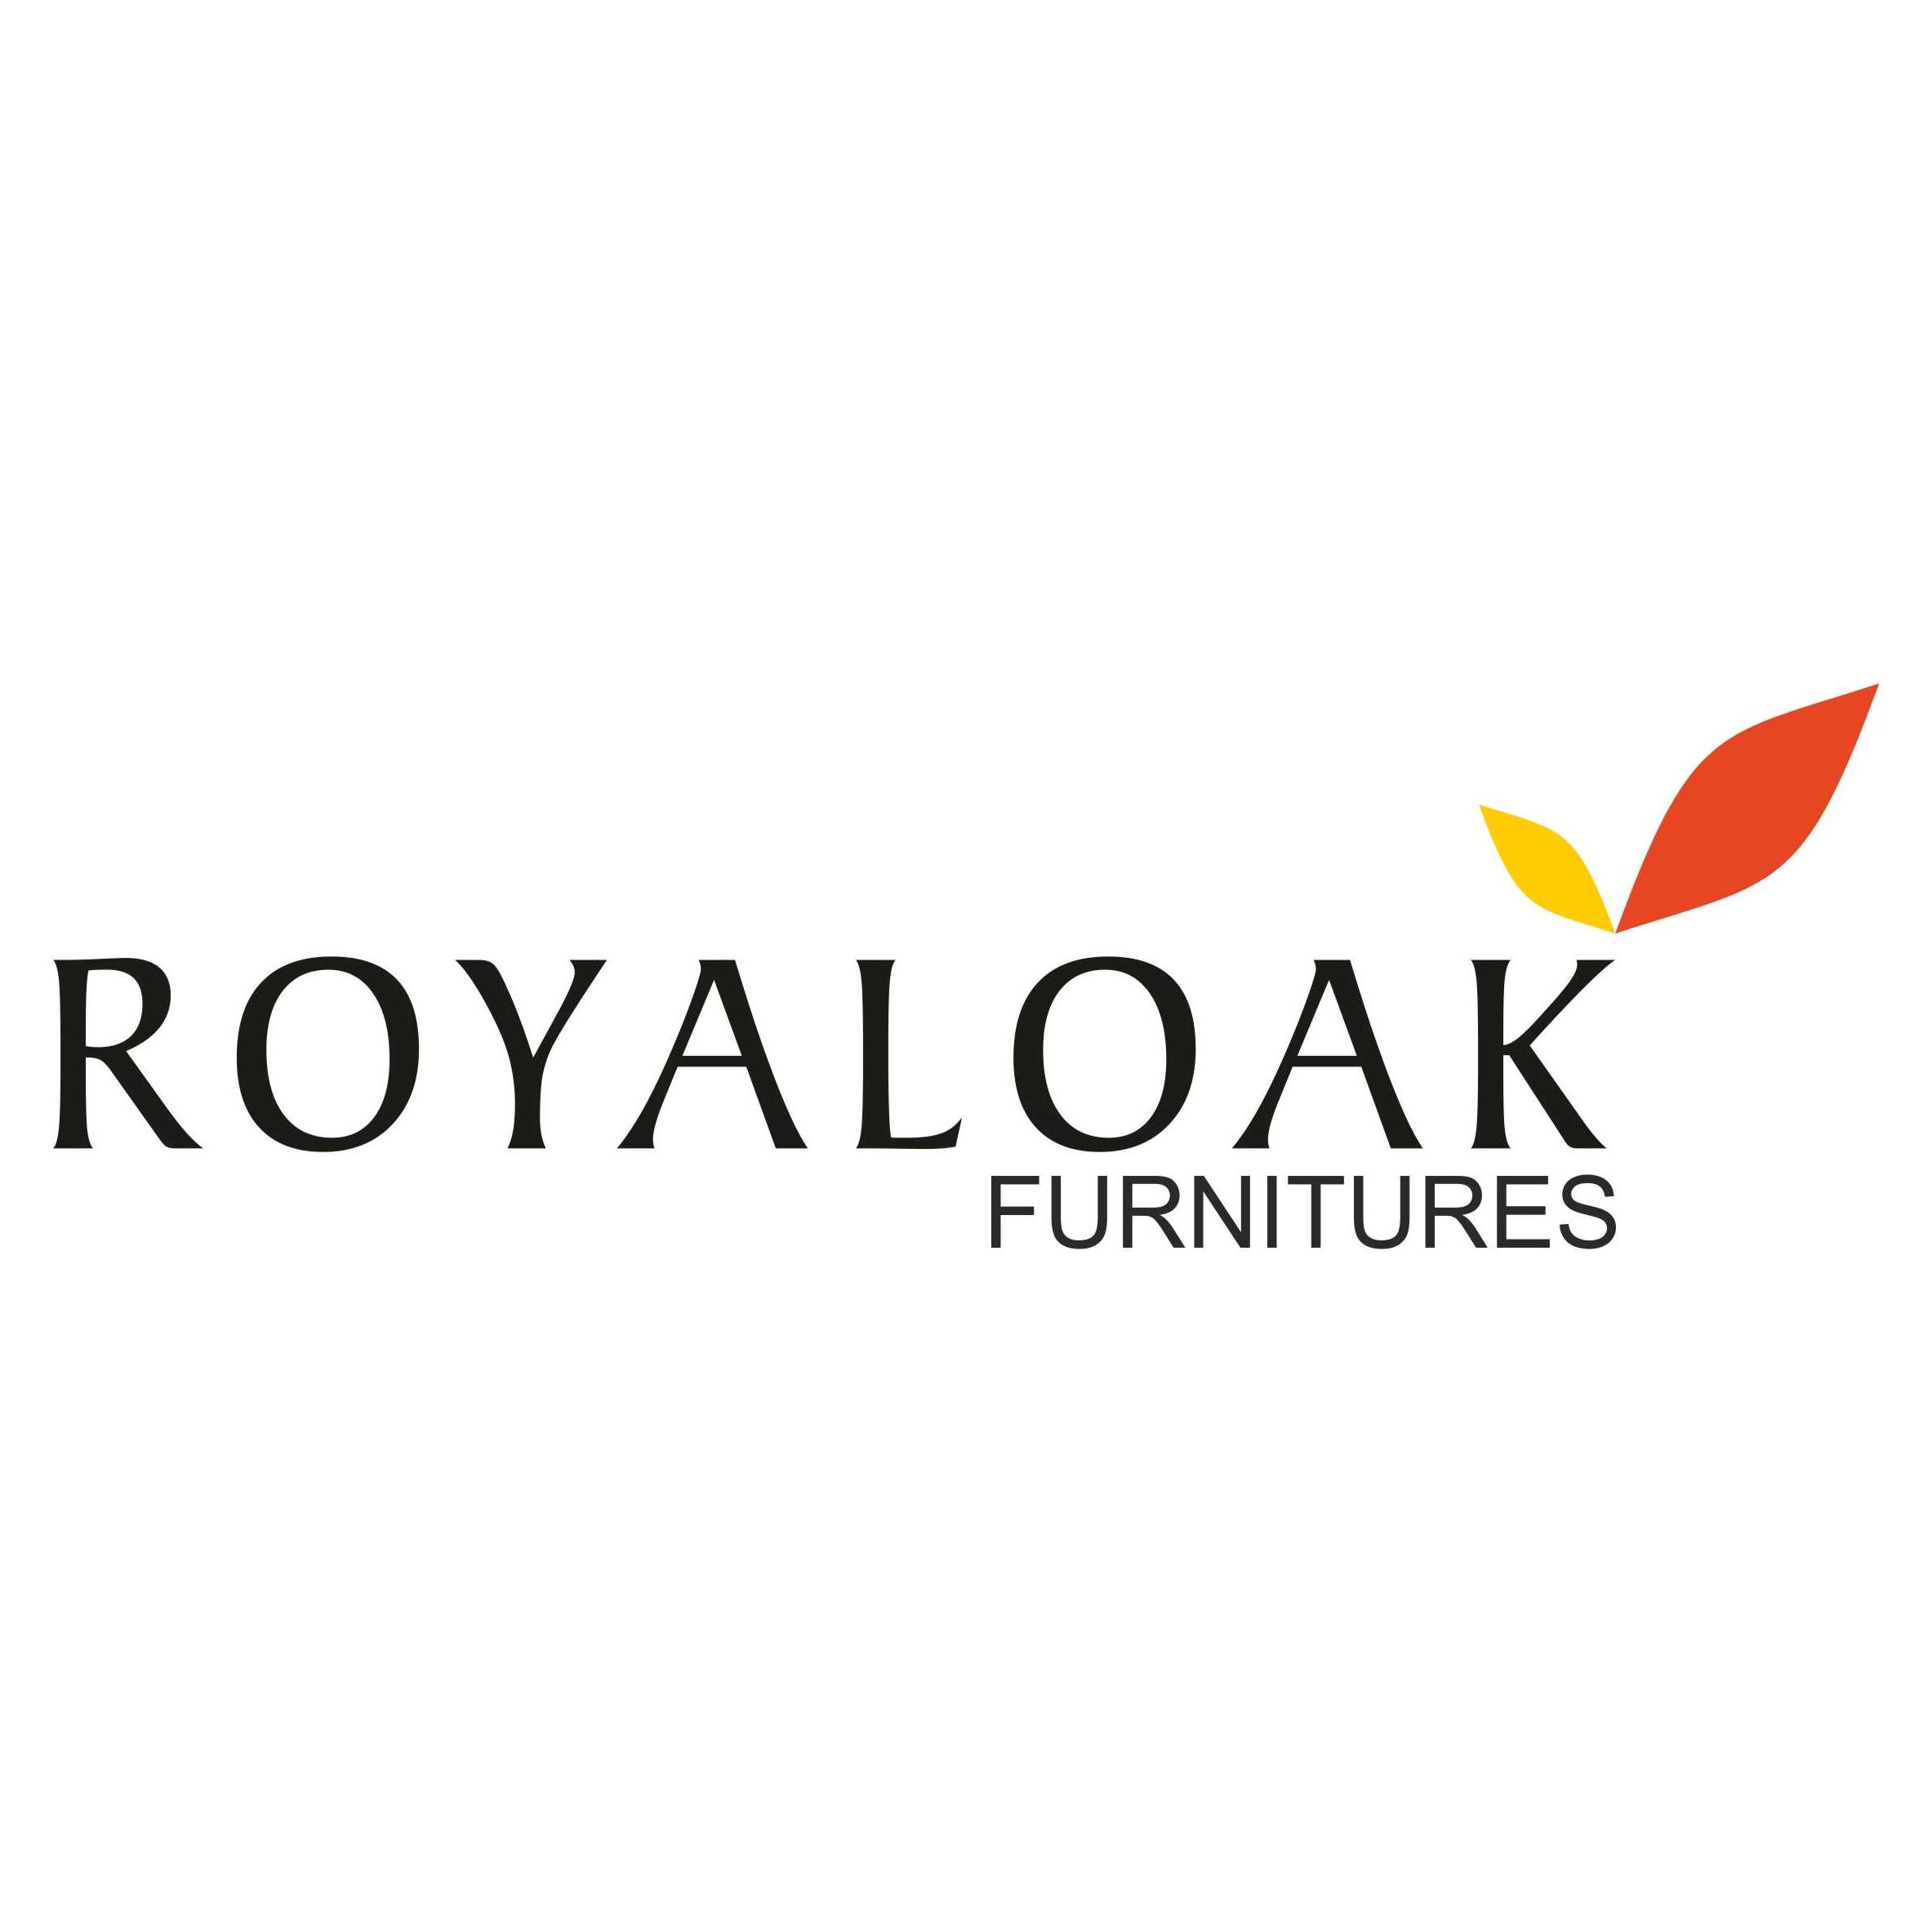 Royaloak India Launches Excellent American Design Furniture Collection in India